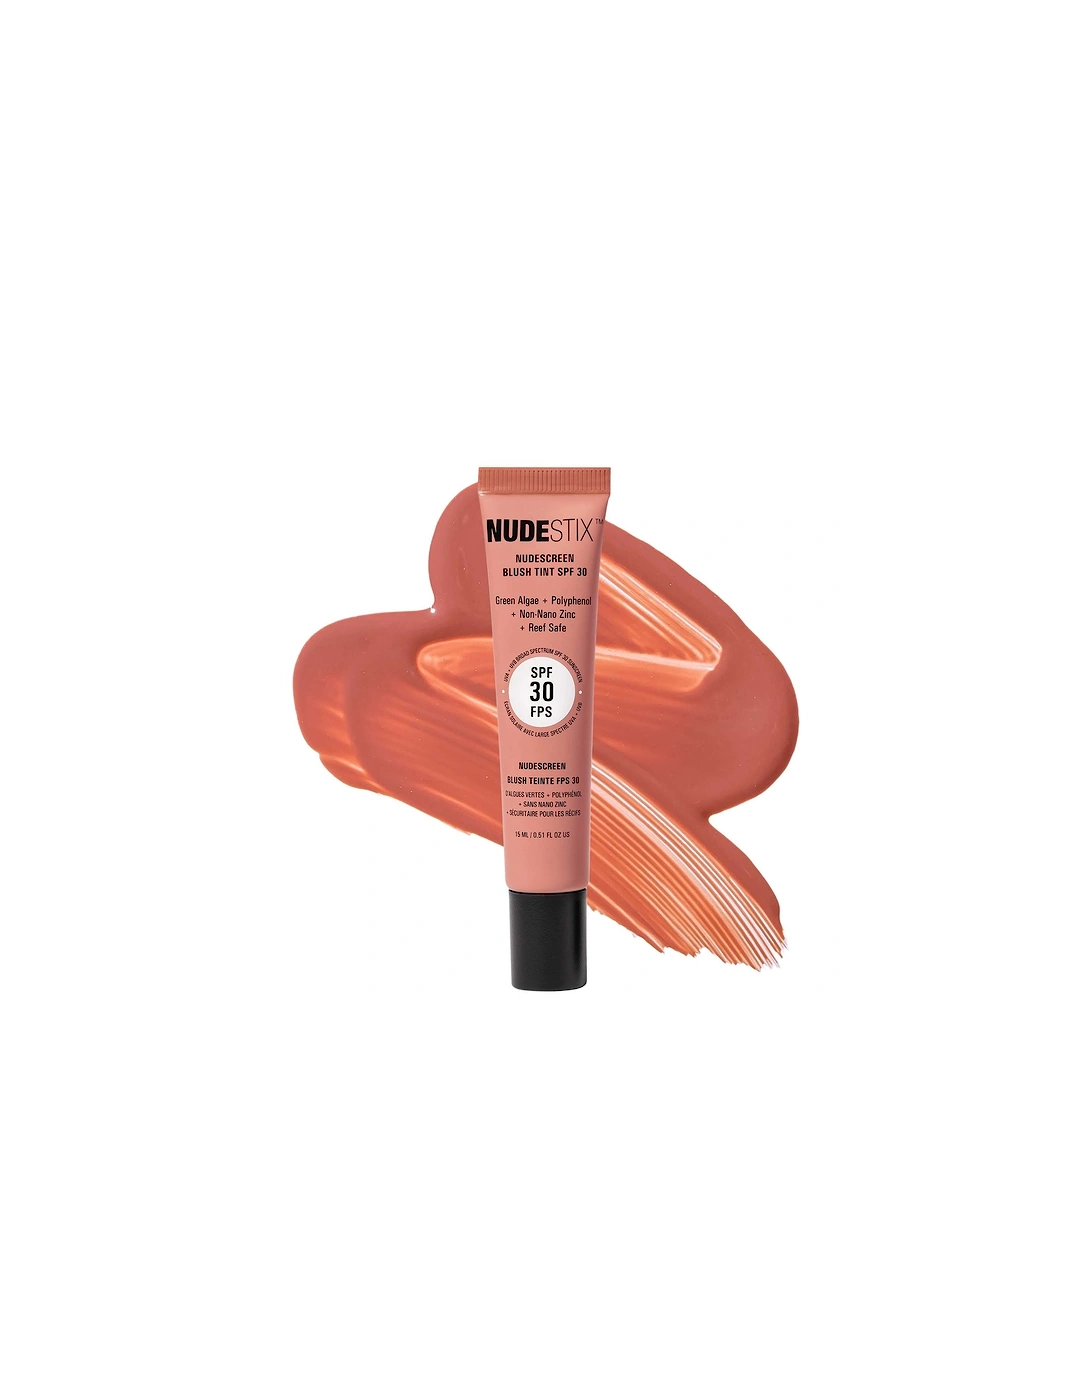 Nudescreen Blush Tint SPF 30 - Sunkissed, 2 of 1